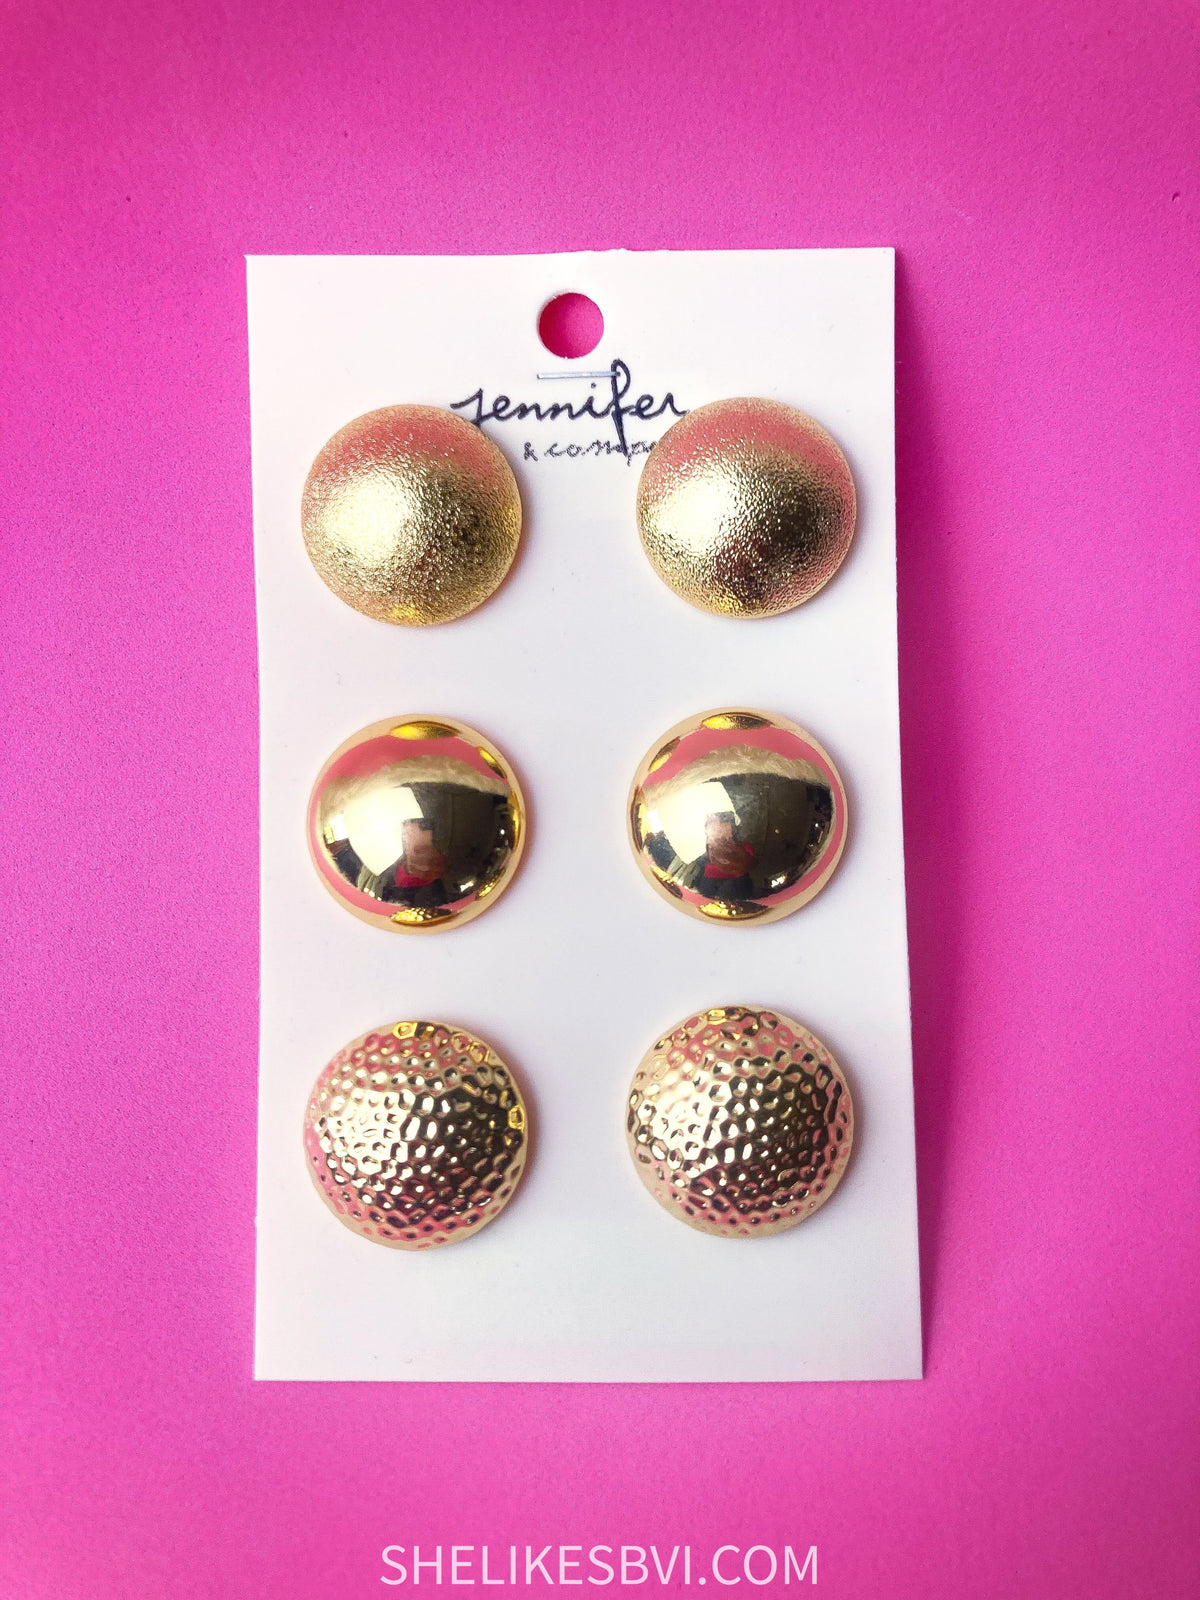 Champion 3 Round Gold Earrings Set